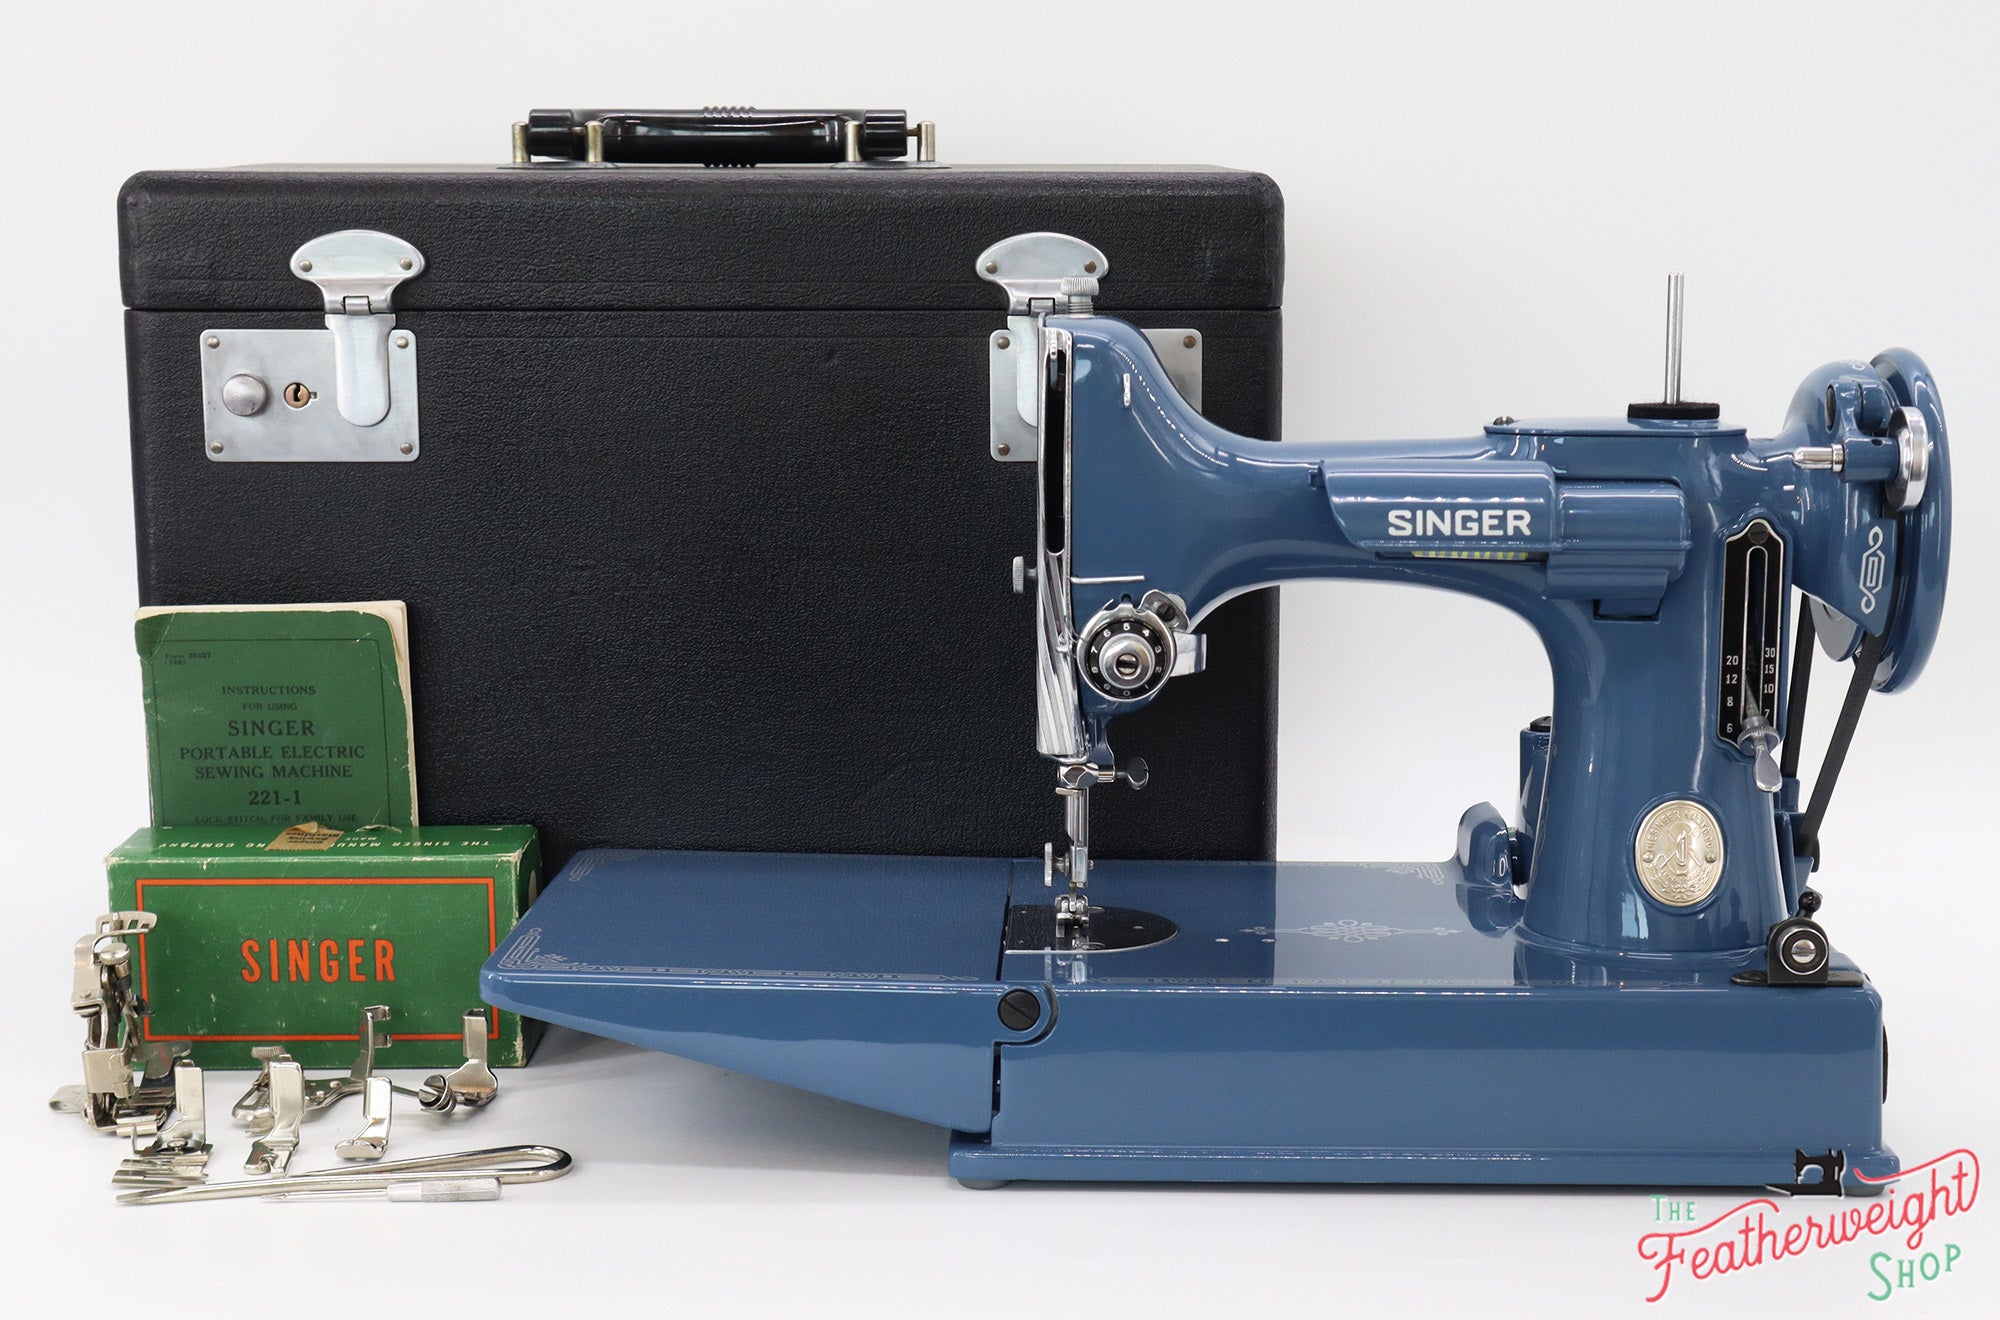 The Singer Featherweight Shop Oil, Sew-Retro for Sewing Machines